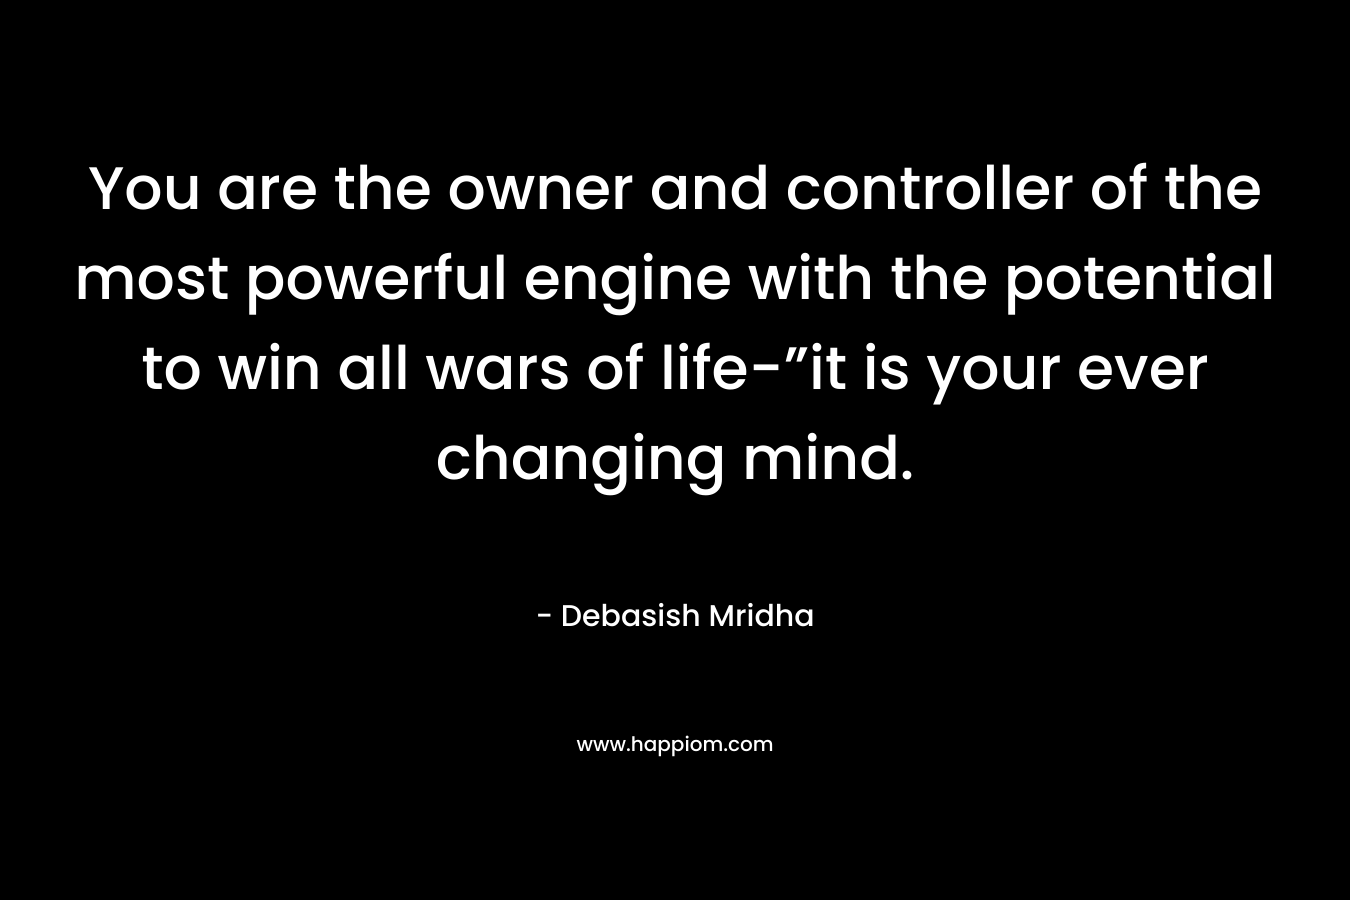 You are the owner and controller of the most powerful engine with the potential to win all wars of life-”it is your ever changing mind. – Debasish Mridha